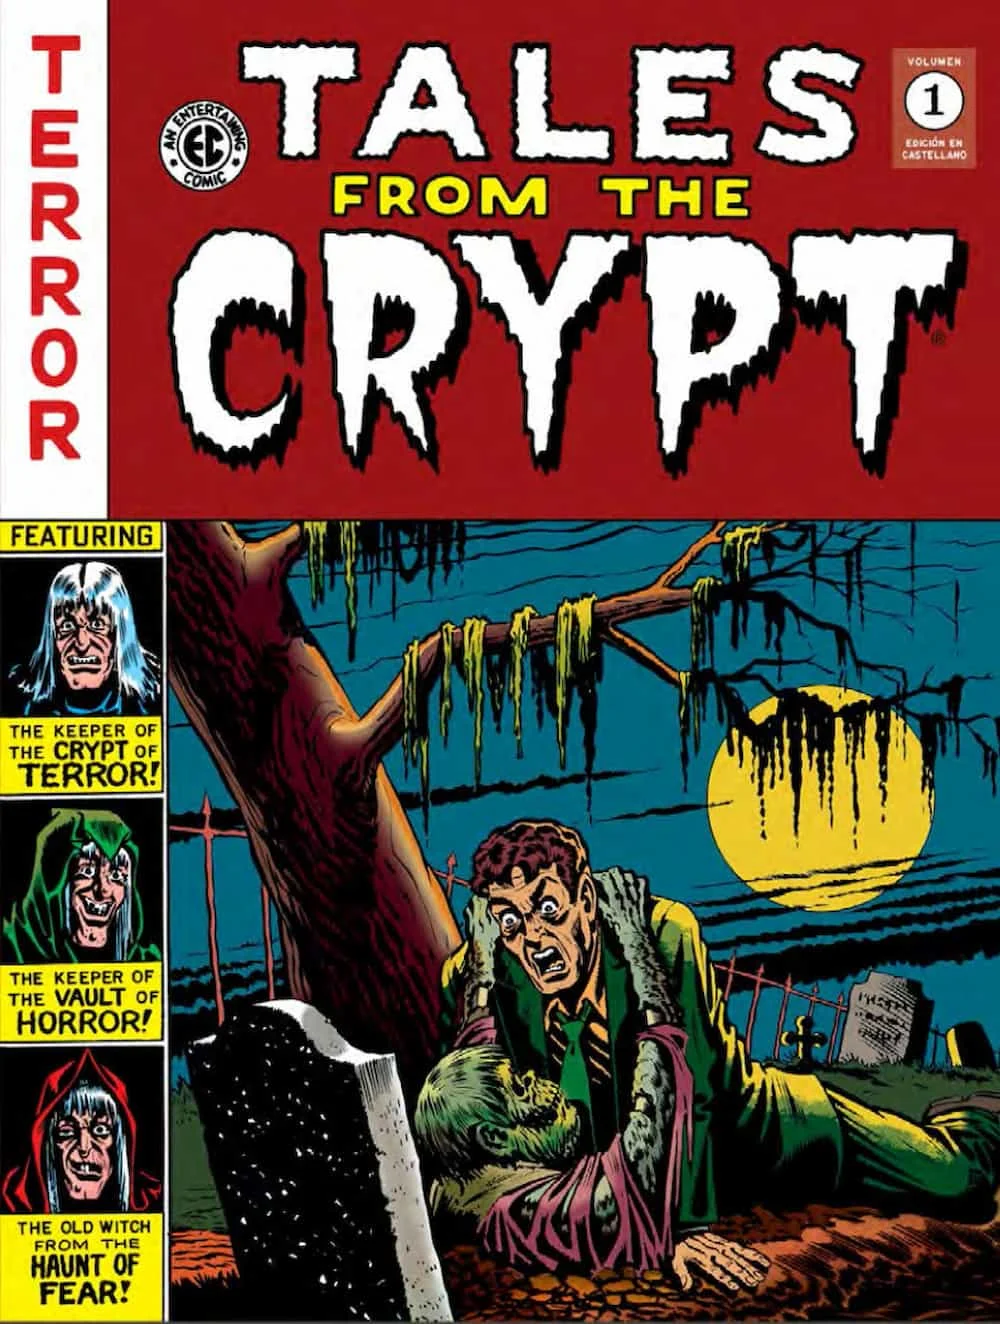 Tales from the Crypt, Vol. 1